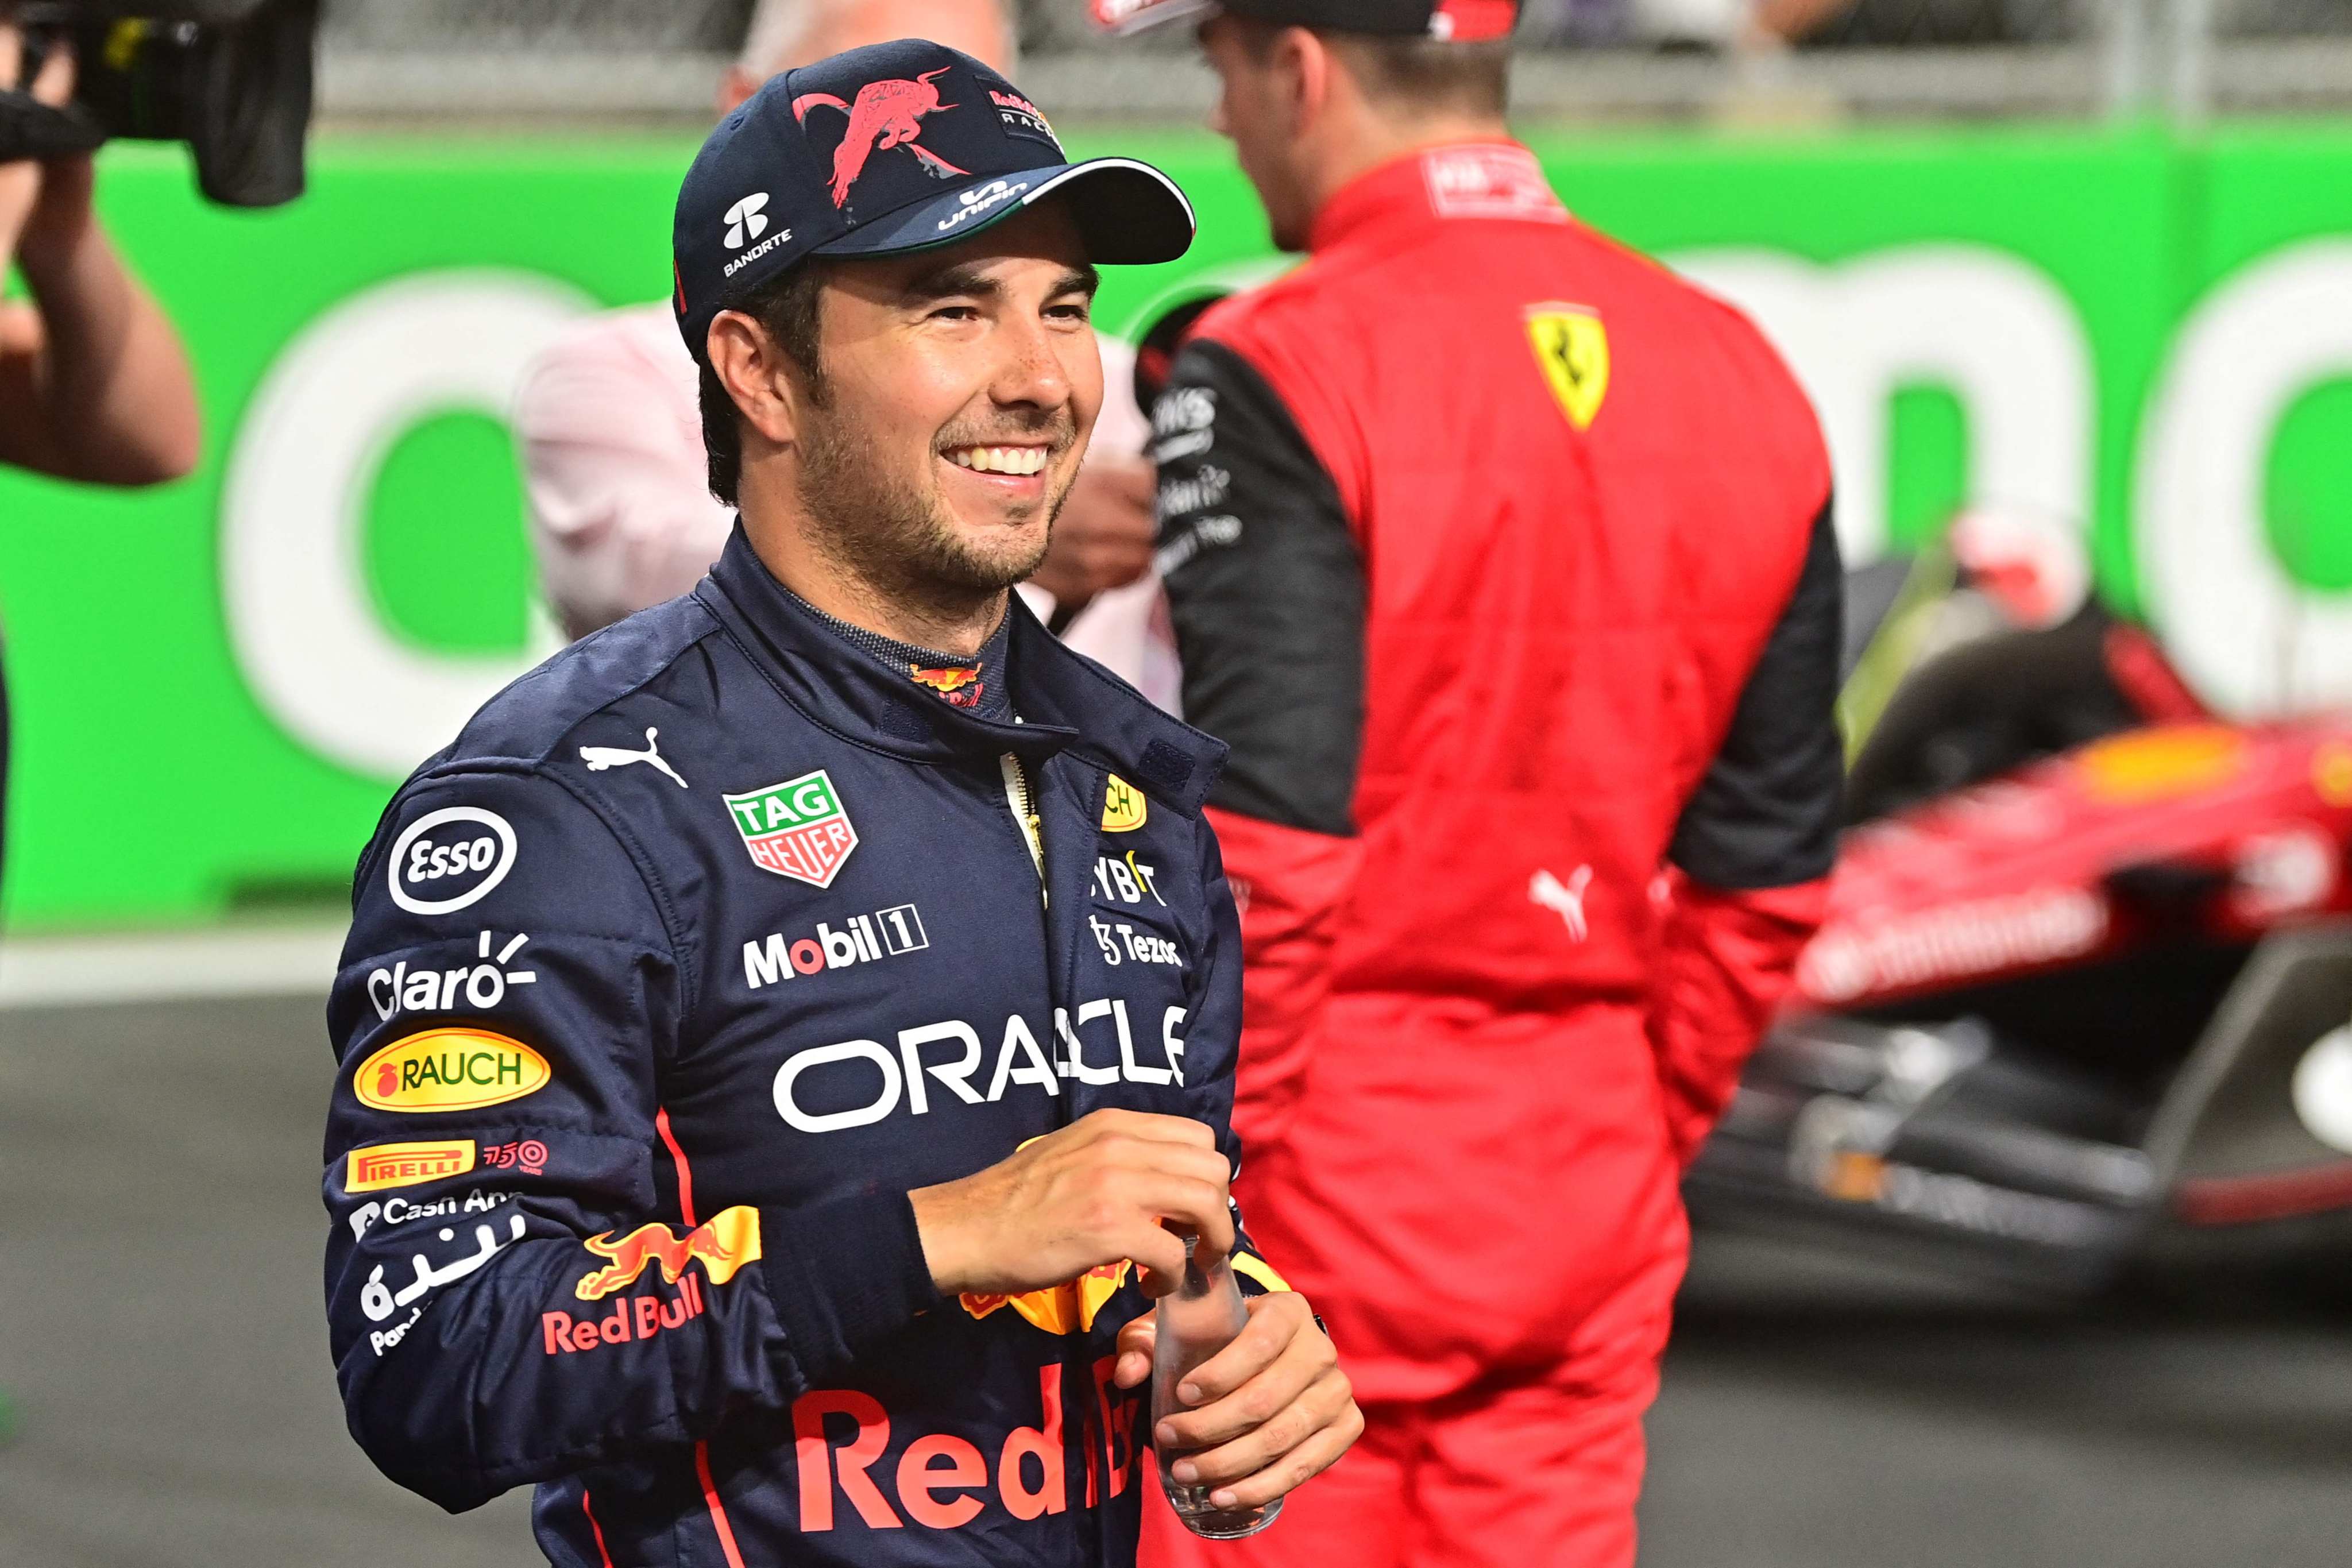 Red Bull’s Sergio Perez smiles after finishing in pole position for the Saudi Arabian Grand Prix. Photo: AFP